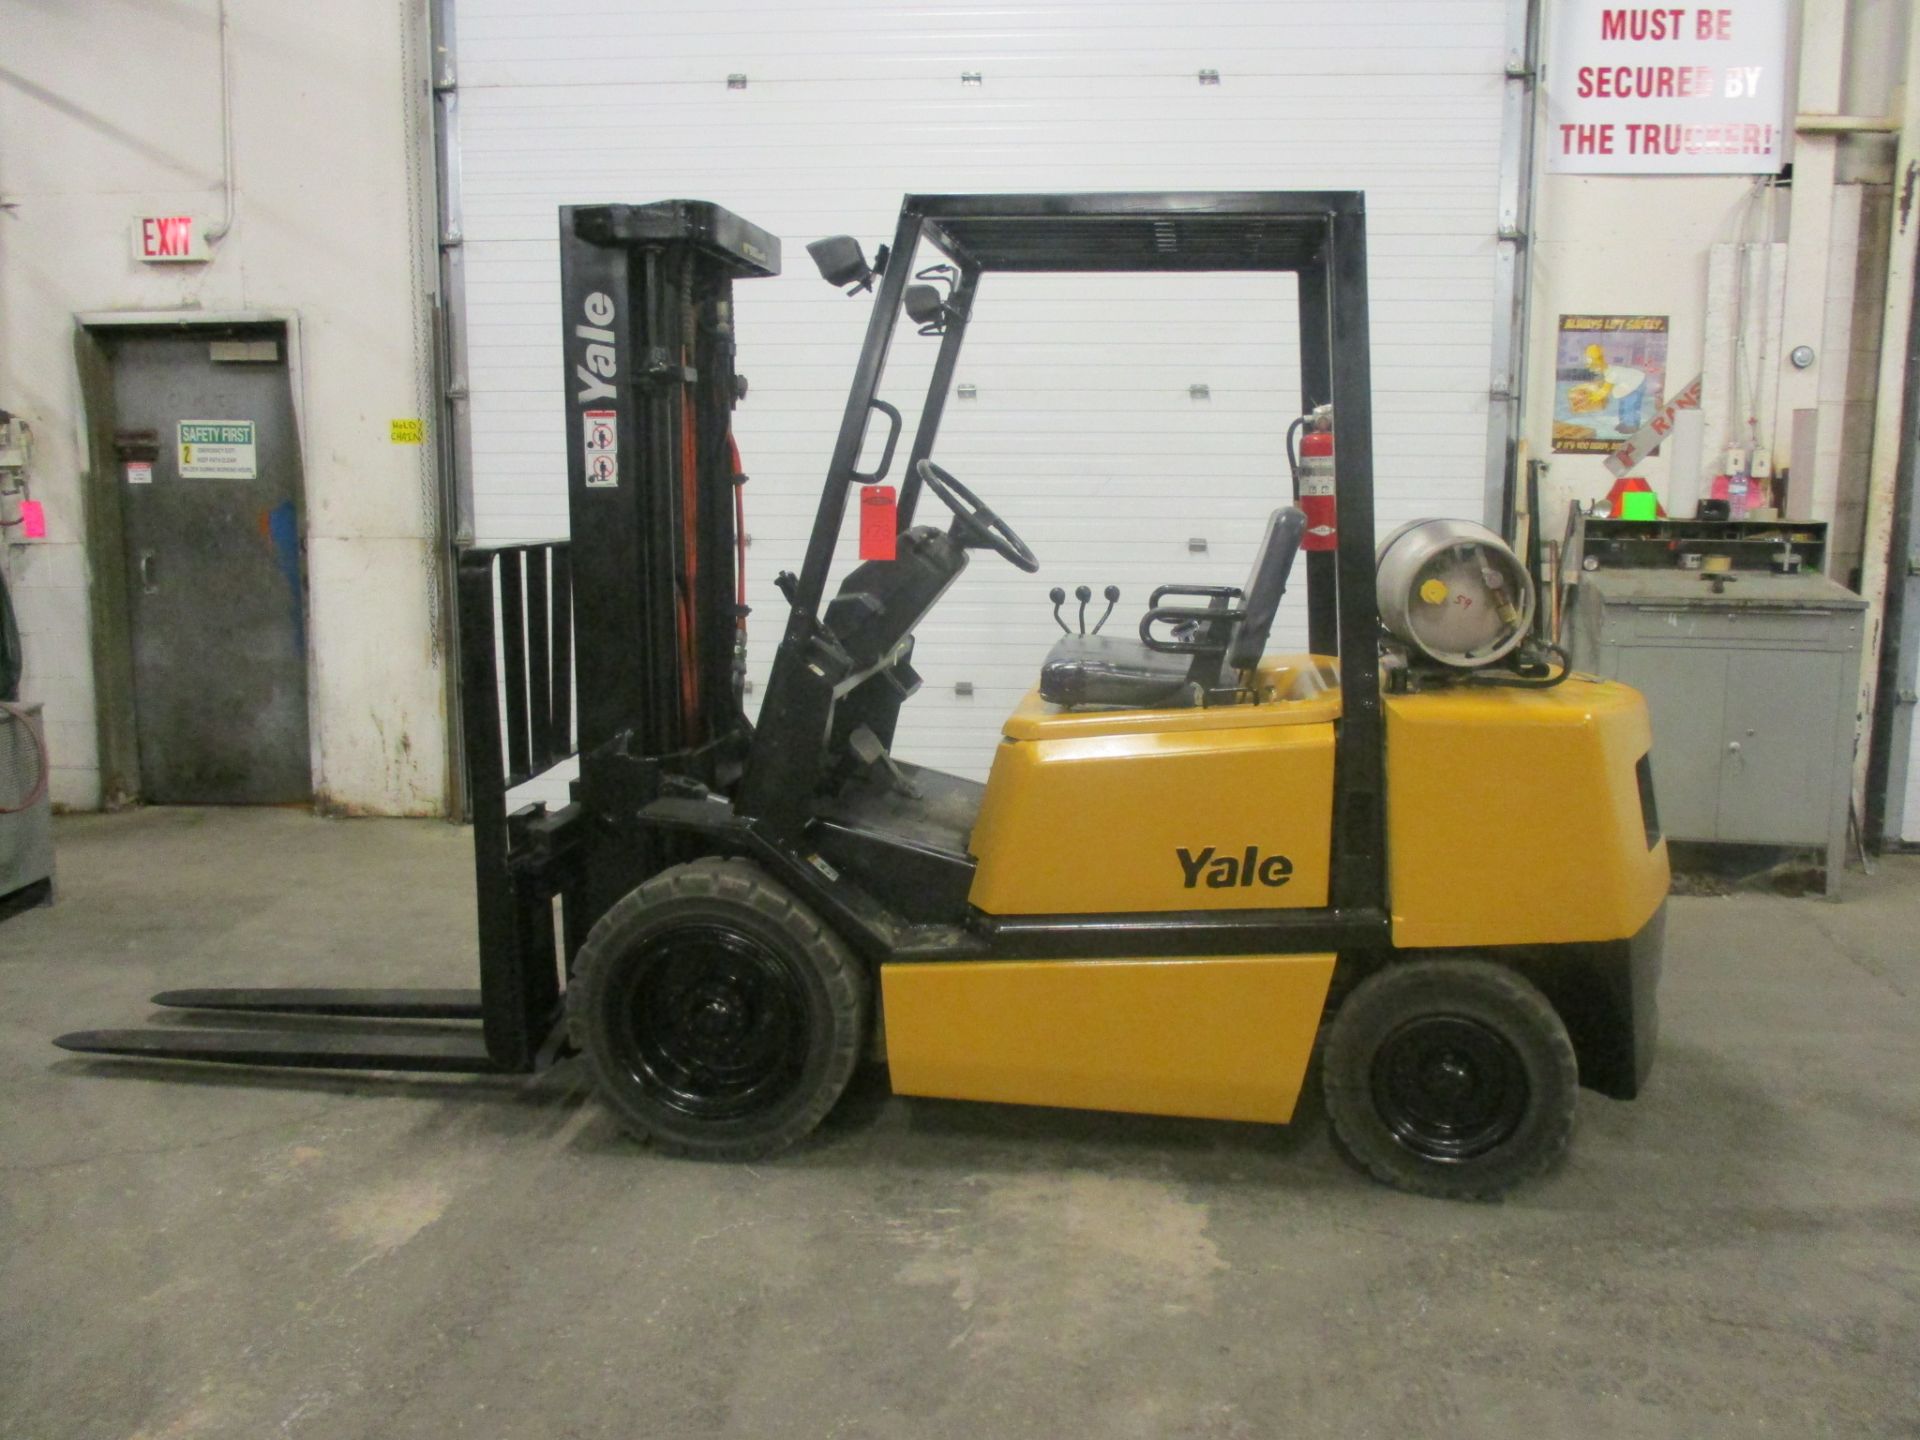 Yale 5500lbs Capacity OUTDOOR Forklift - LPG (propane) with 3-stage mast & sideshift